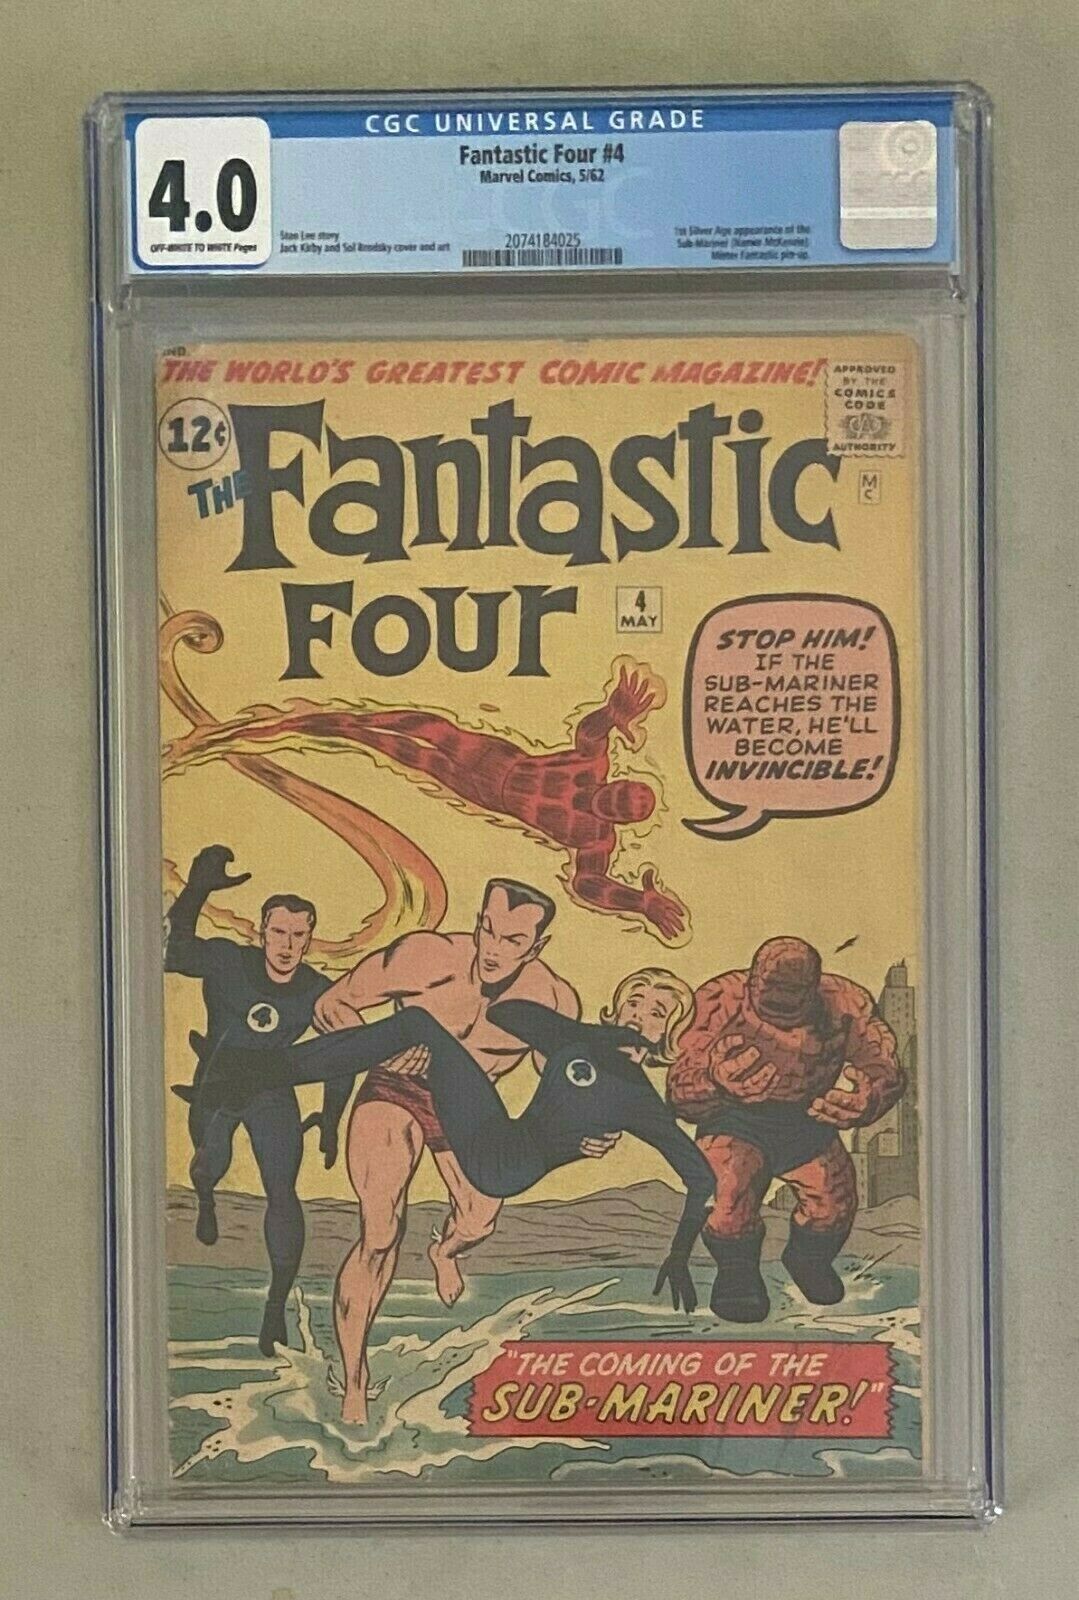 FANTASTIC 4 FOUR 4 Marvel 1962 CGC 40 SubMariner 1st Silver Age Appearance